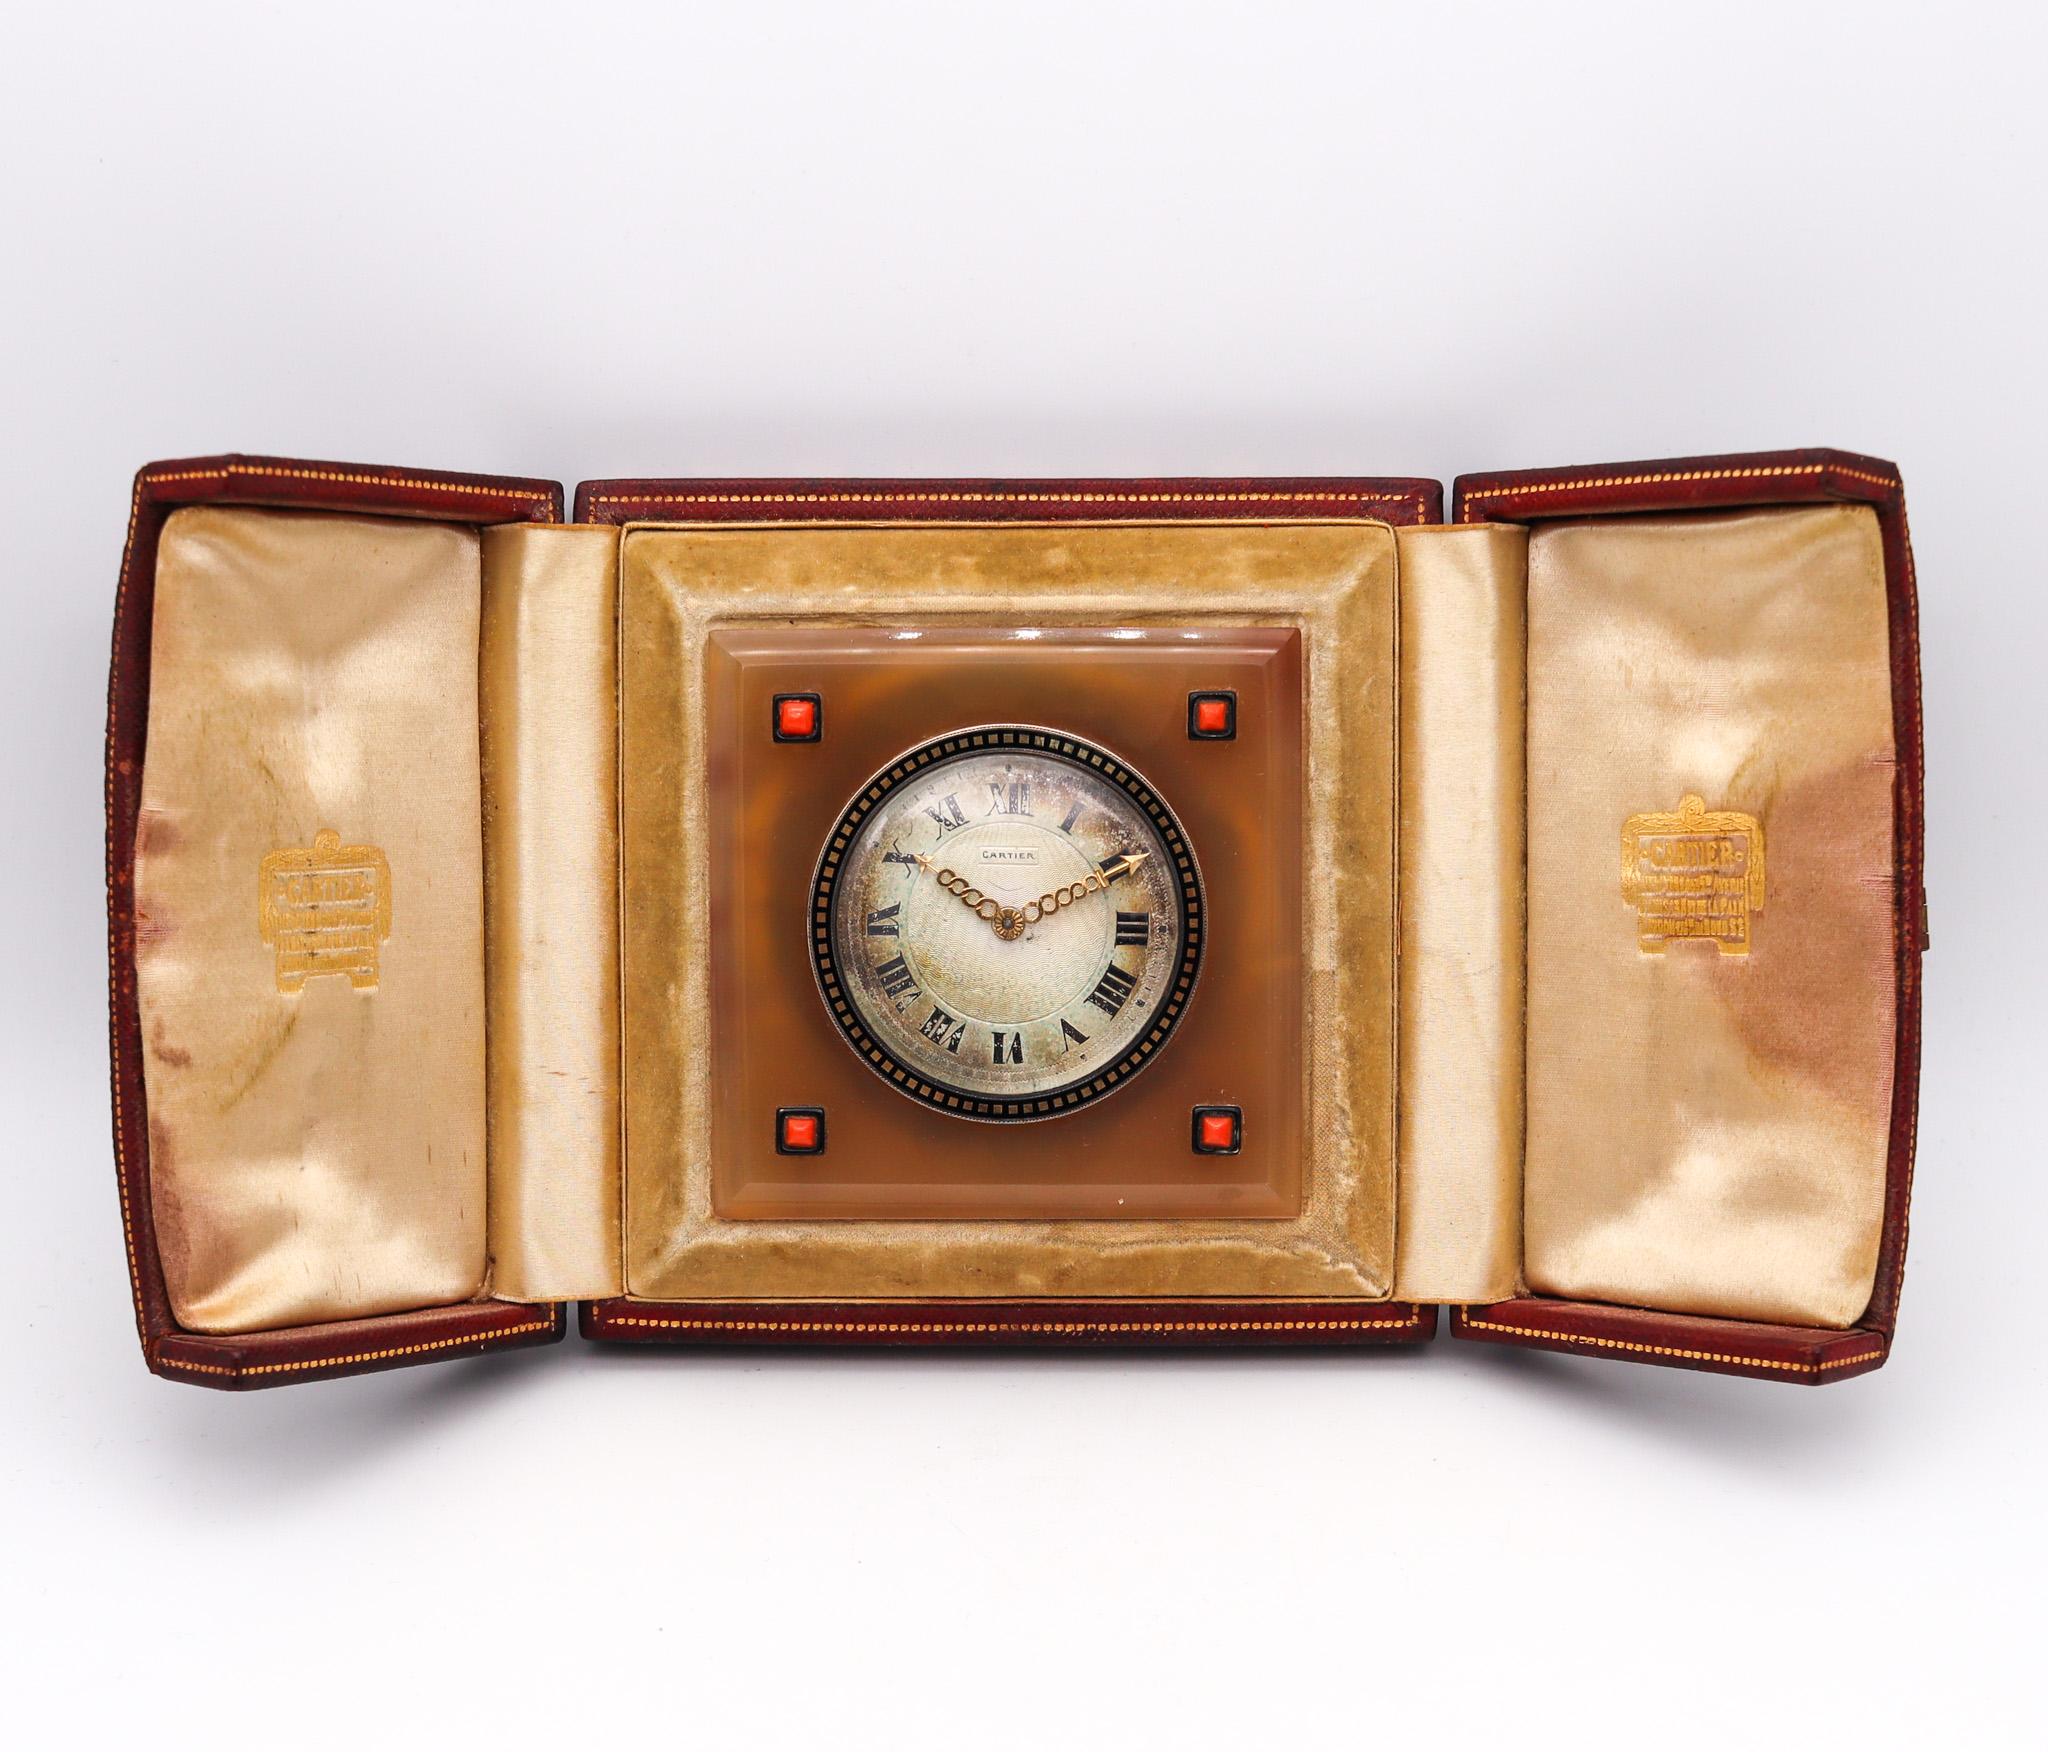 Belle epoque desk clock designed by Cartier.

Beautiful square desk clock, created by the house of Cartier, during the art deco period, back in the 1925. This stunning piece has been designed with strong geometric patterns and carefully crafted with